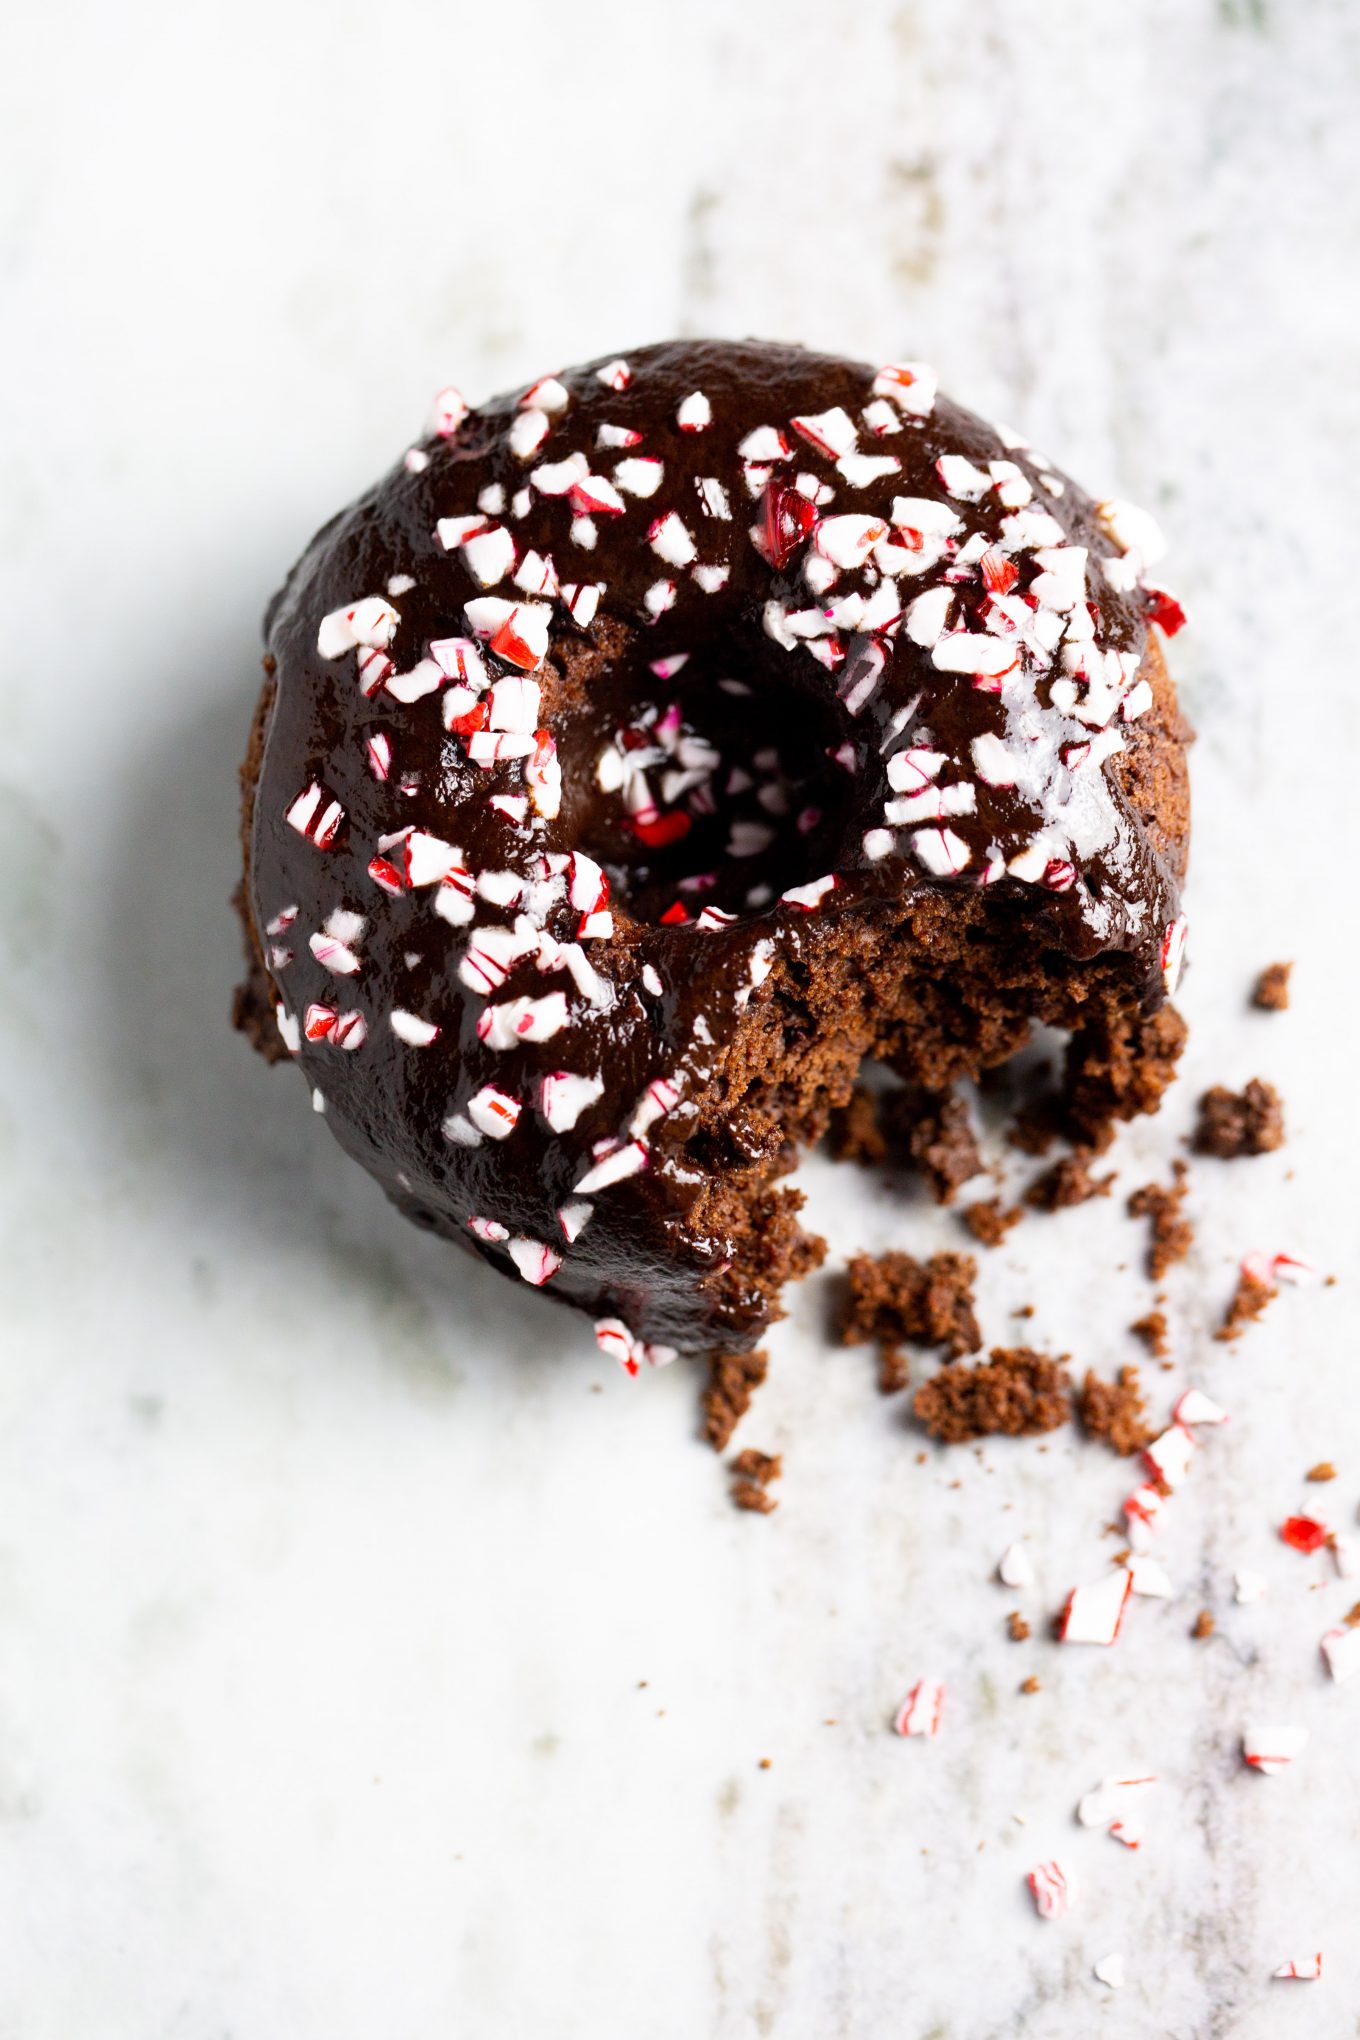 A chocolate donut with peppermint sprinkles on top.